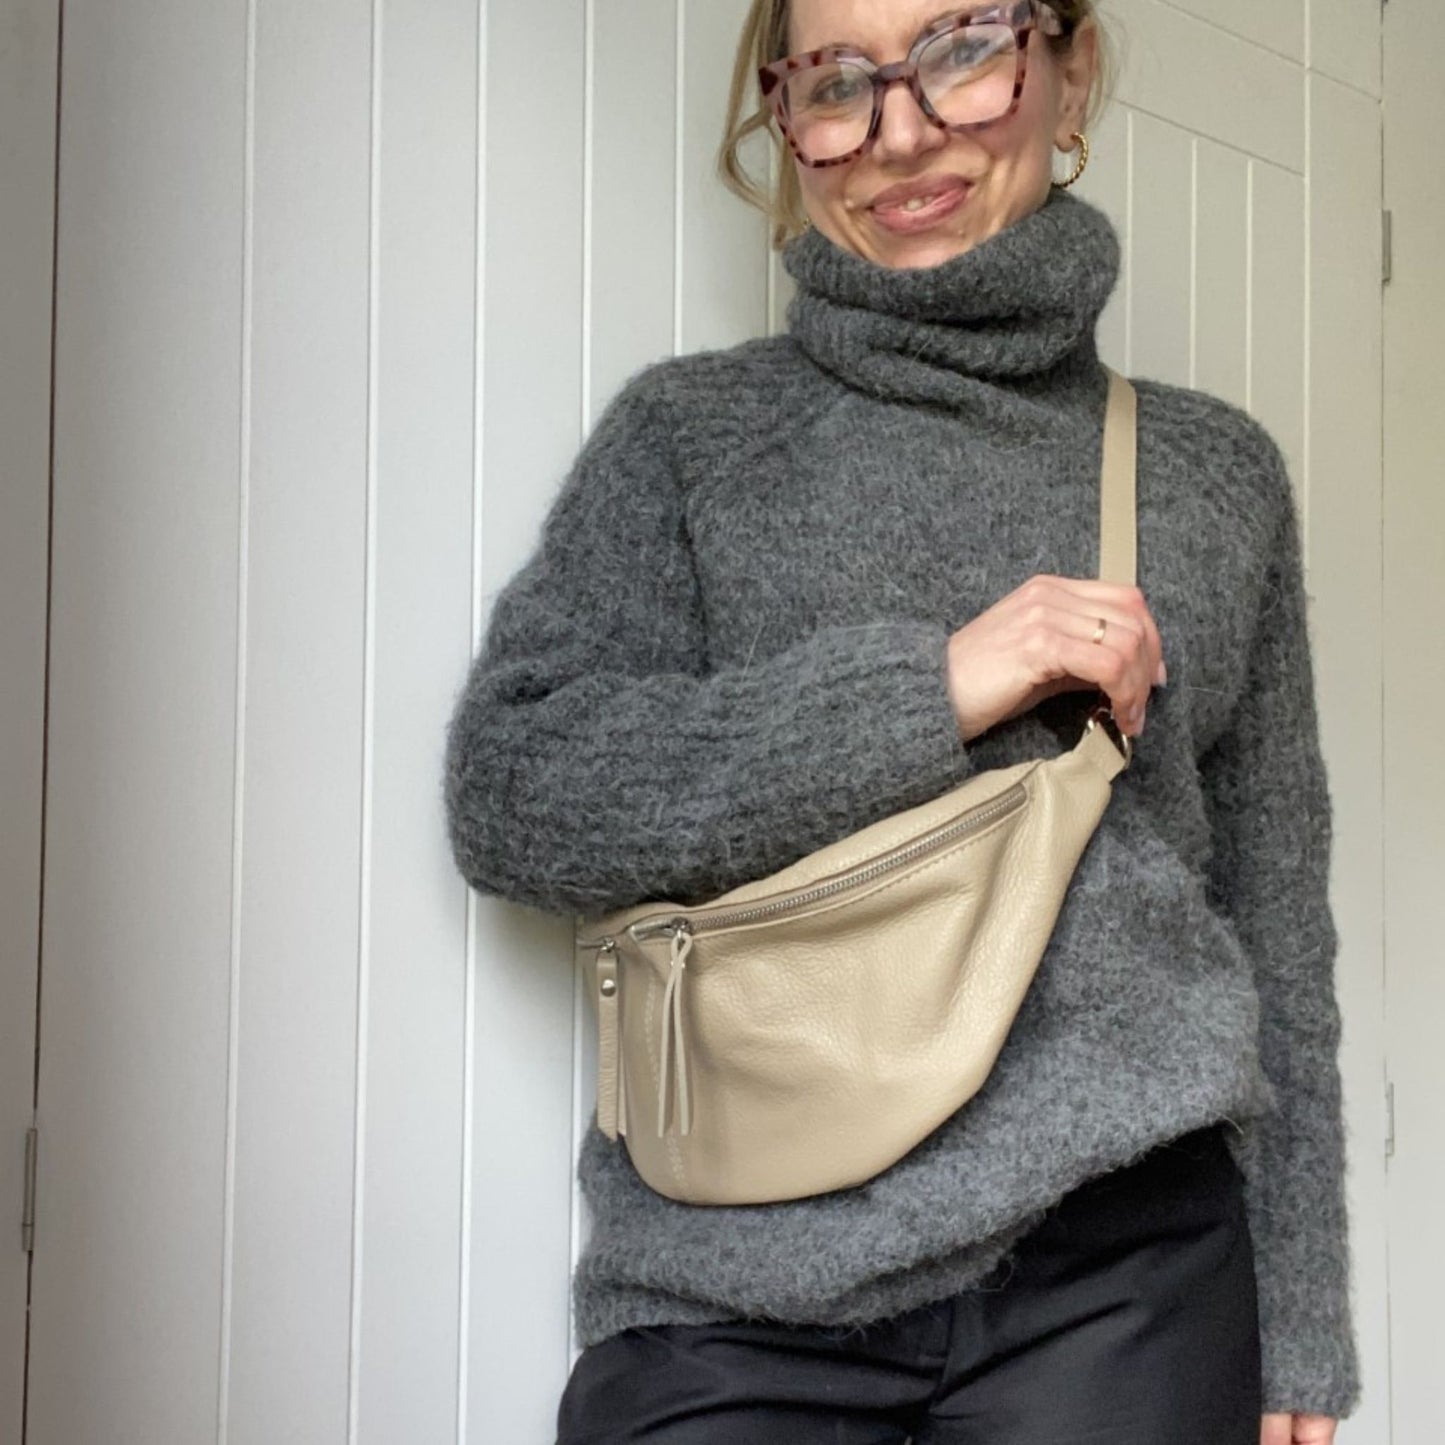 The Large Leather BumBag / Sling Bag (Exposed Zips)